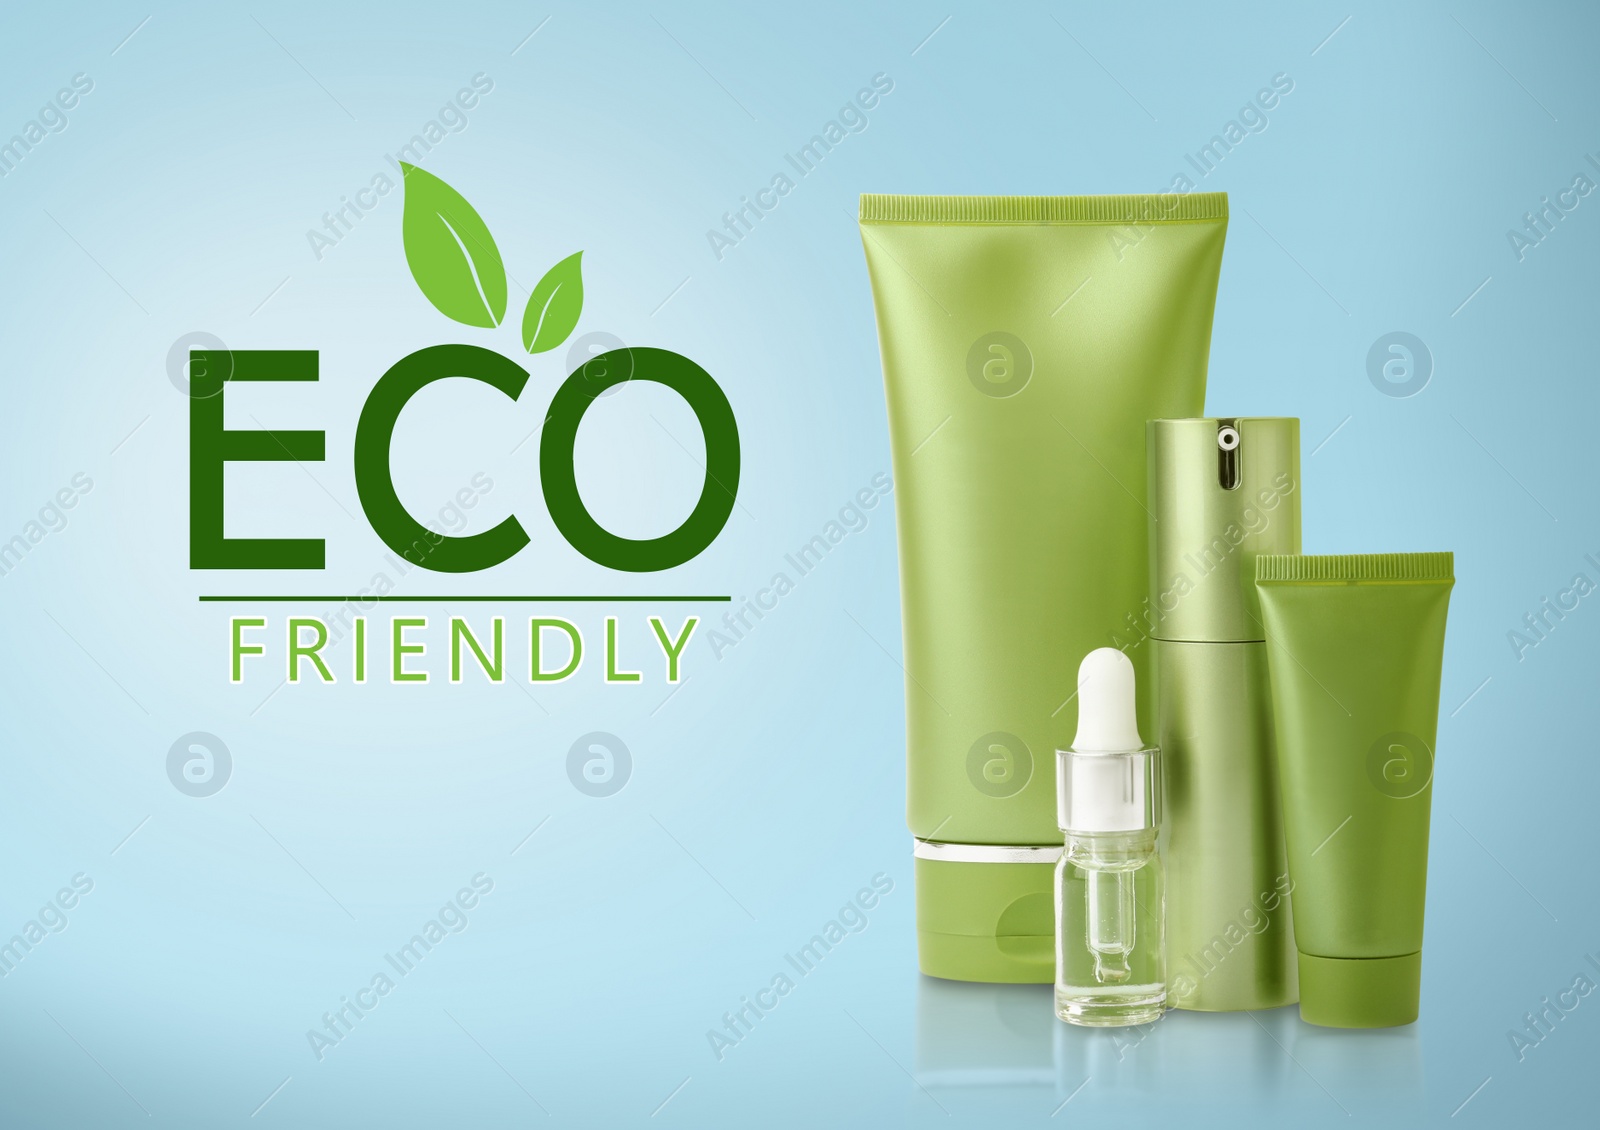 Image of Organic eco friendly cosmetic products on light blue background